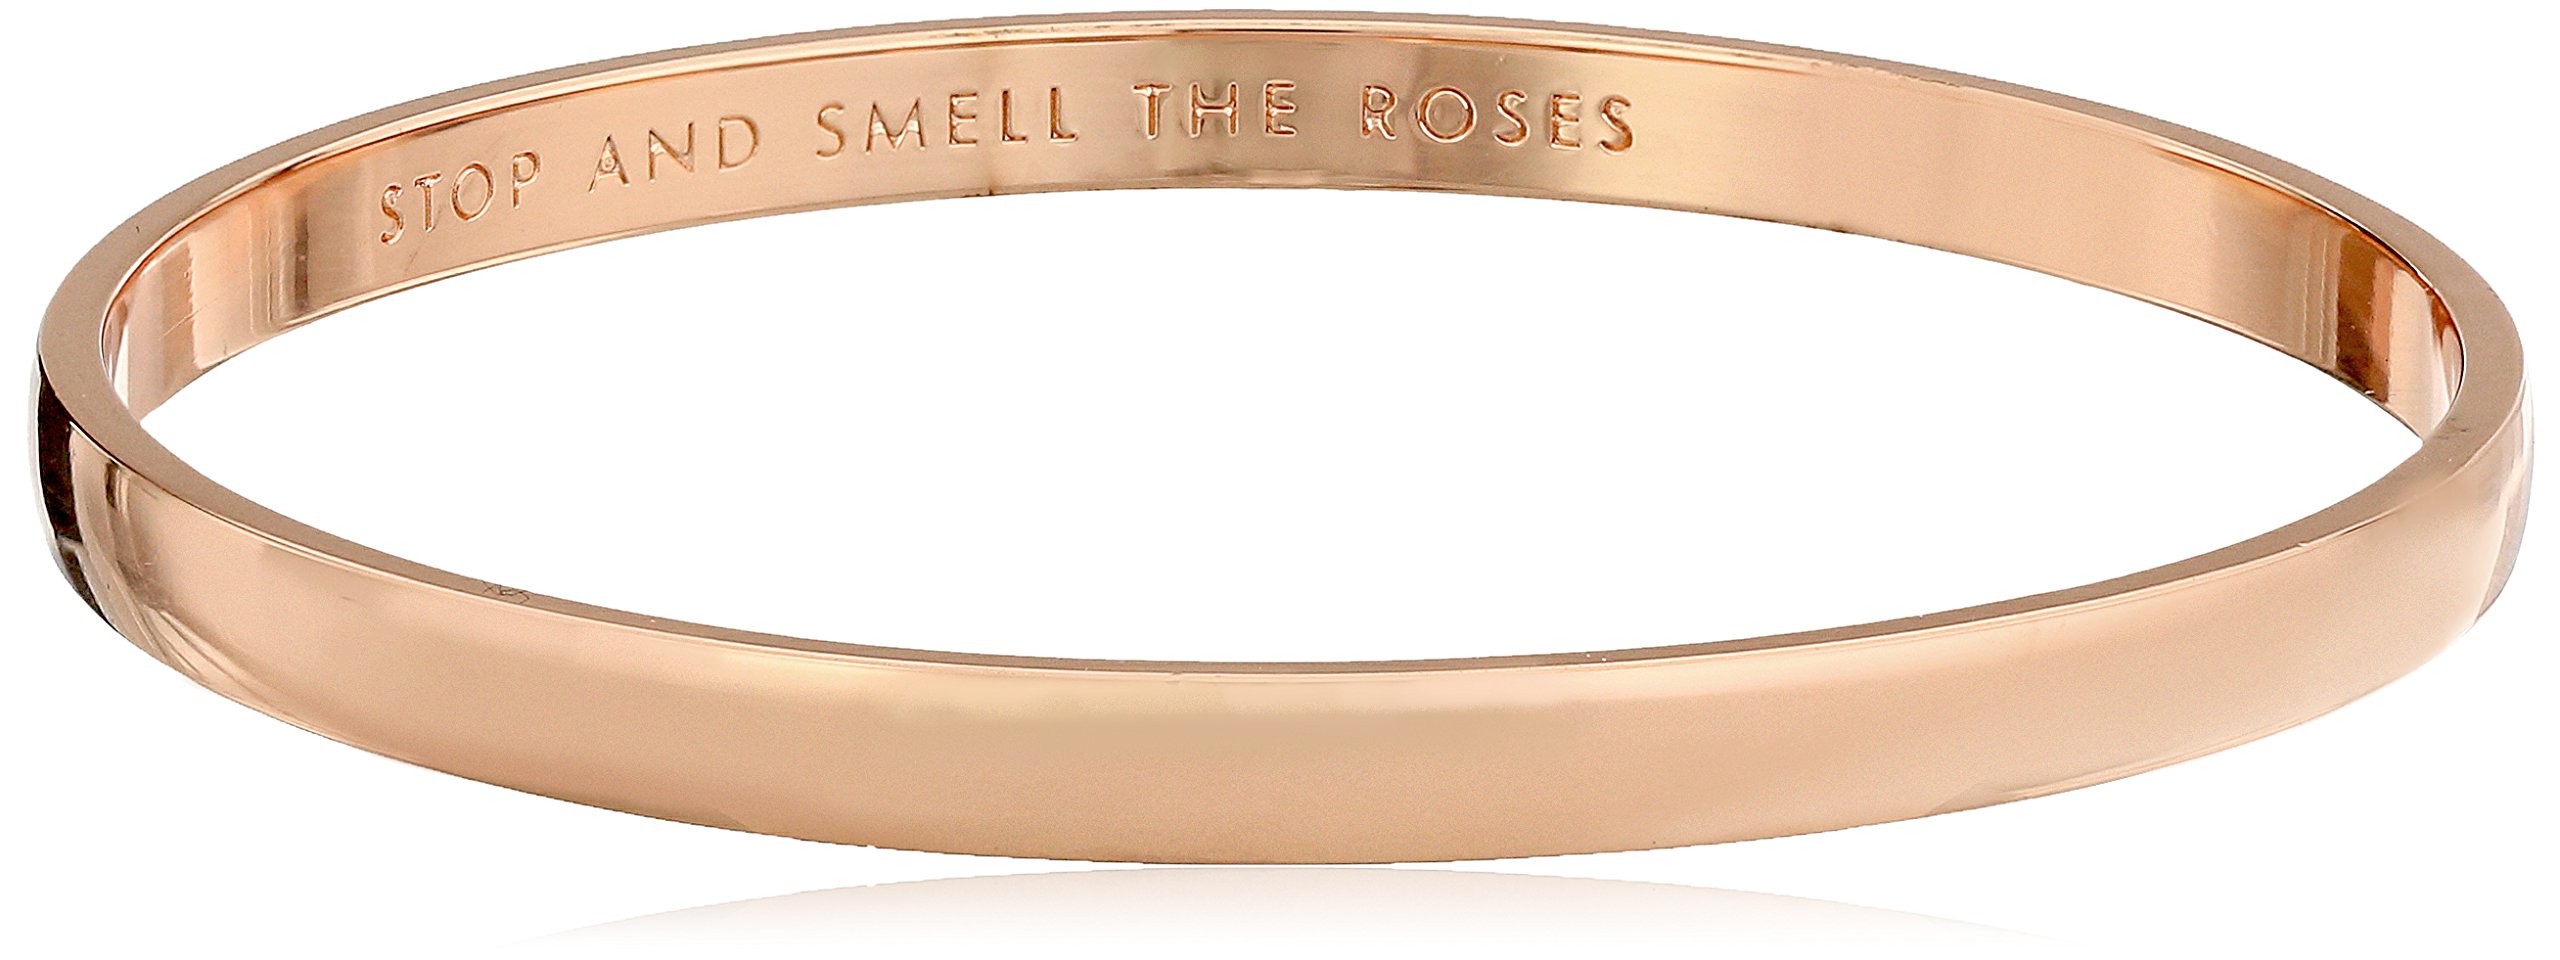 Kate Spade New York Women's Idiom Bangles Stop and Smell The Roses - Solid